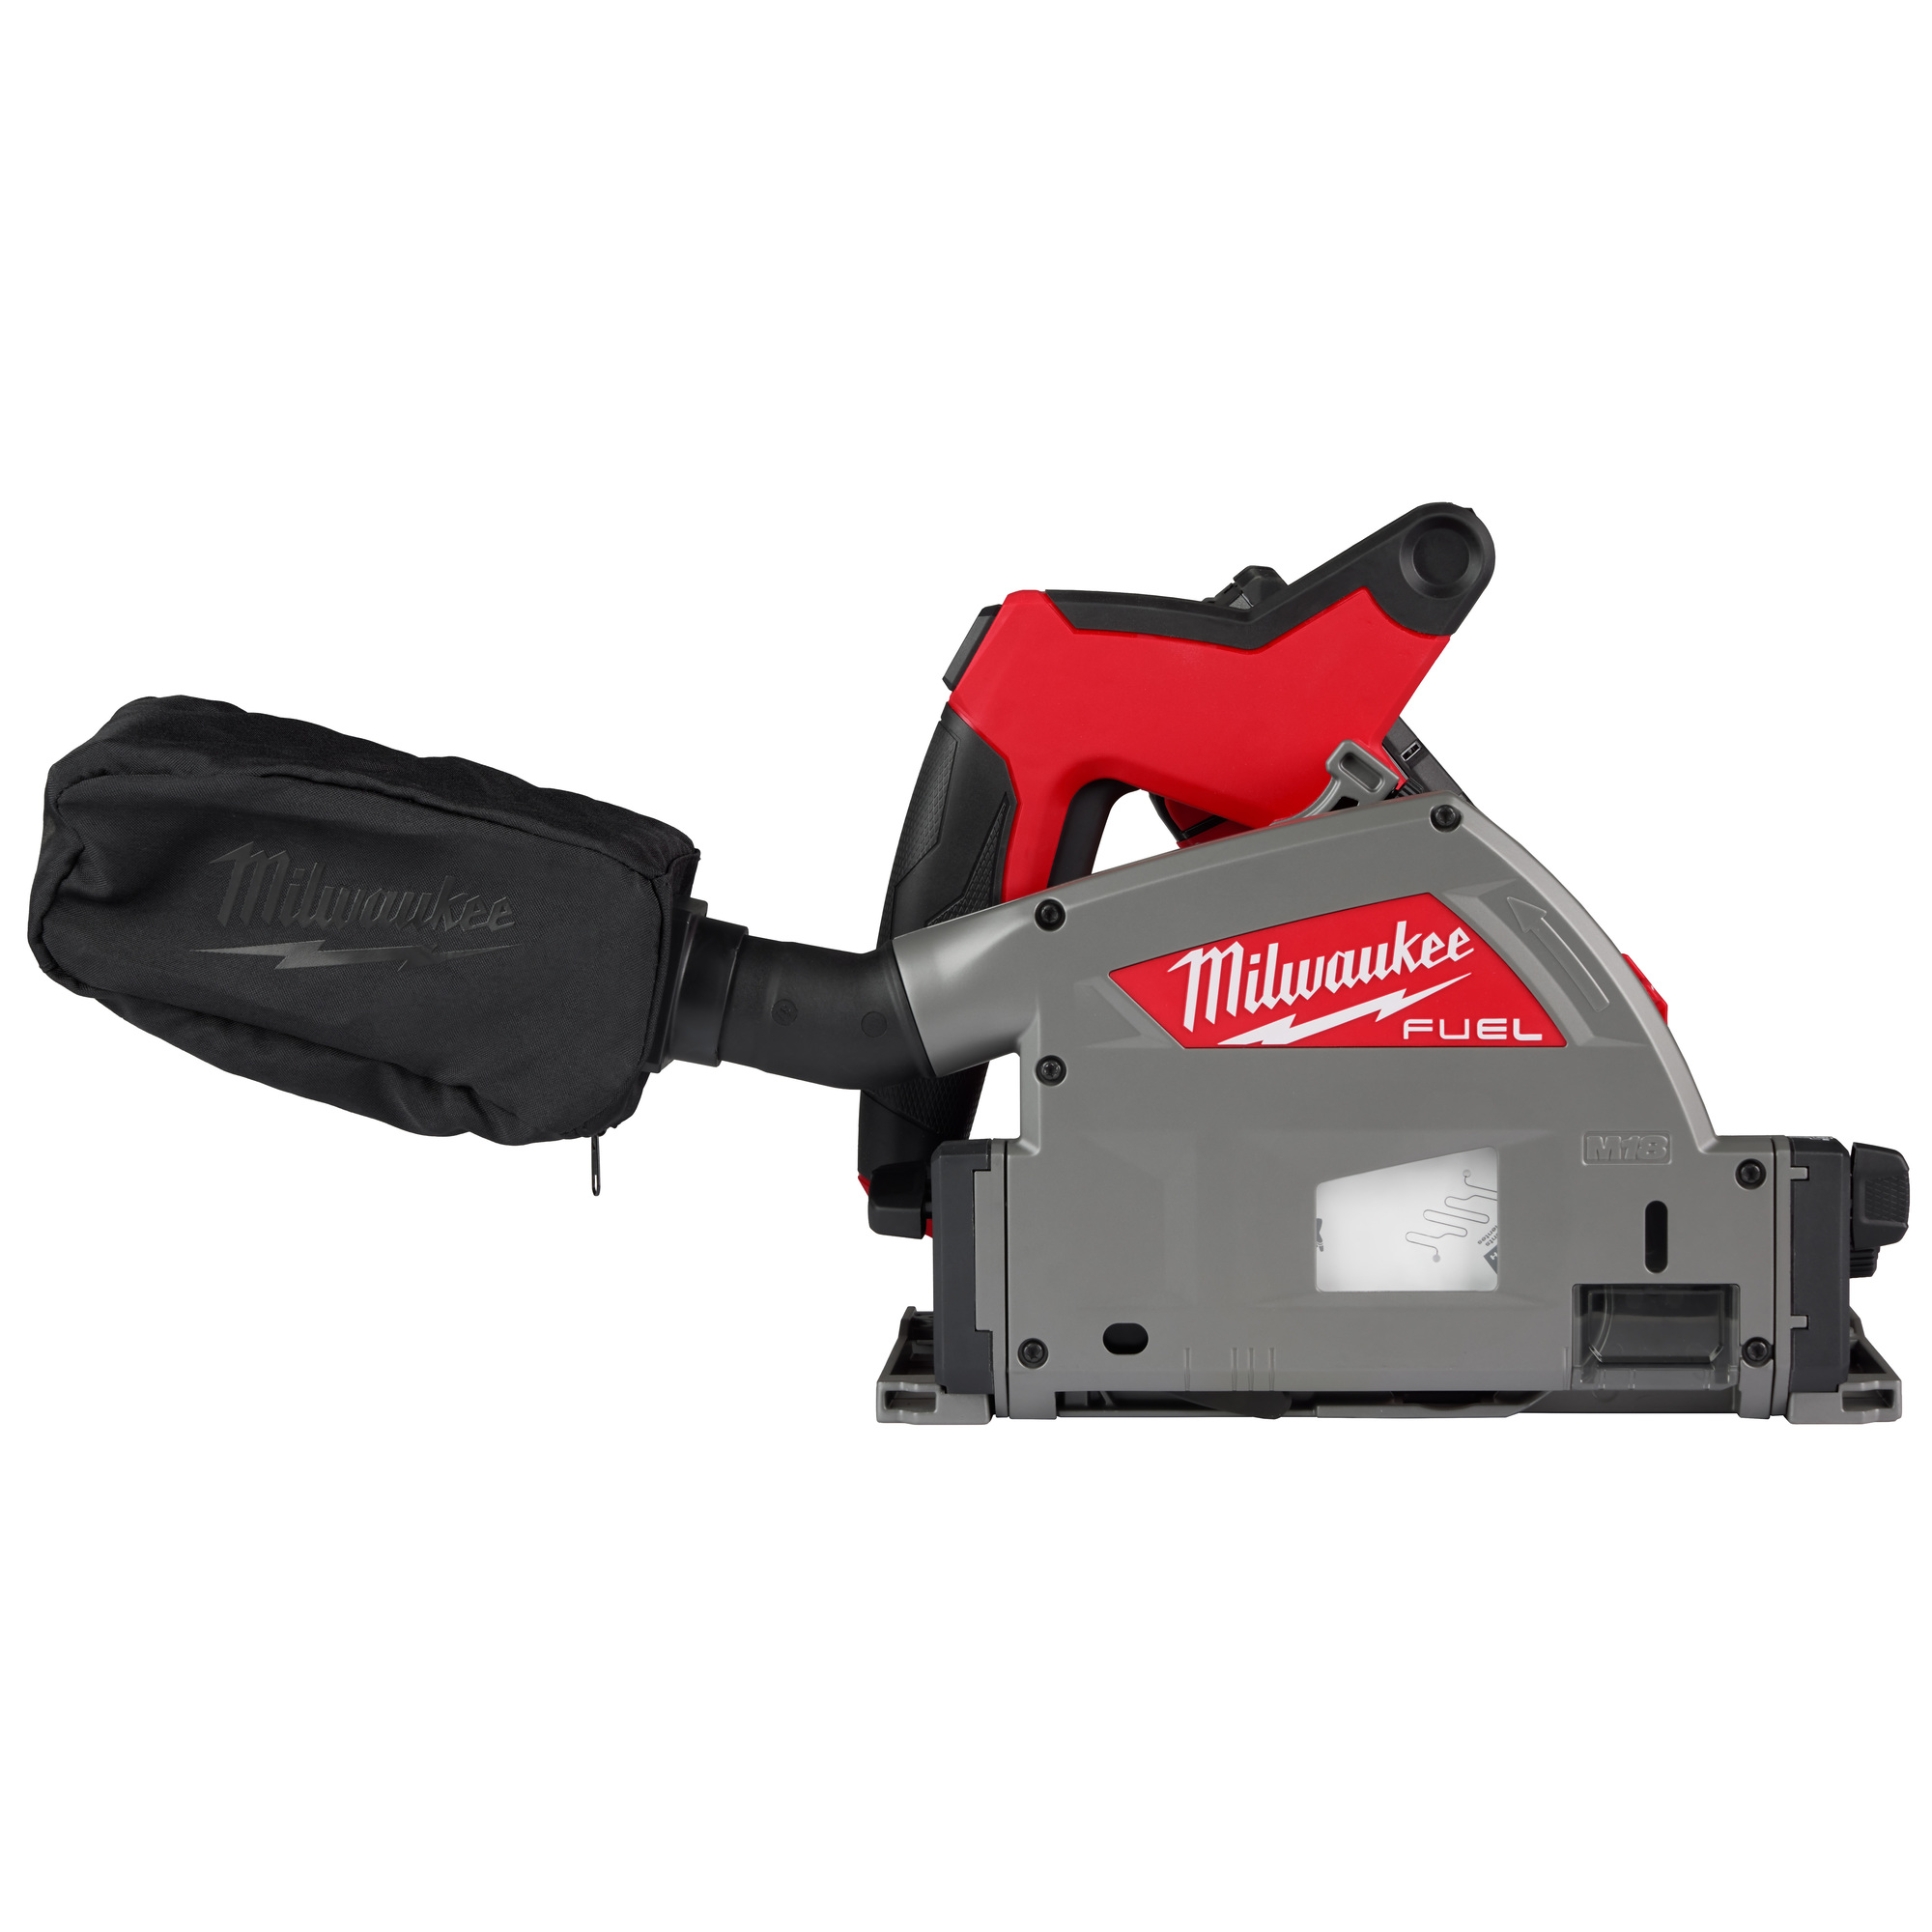 Milwaukee M18 FUEL Plunge Track Saw 6-1/2Inch, Tool Only, Model 2831-20